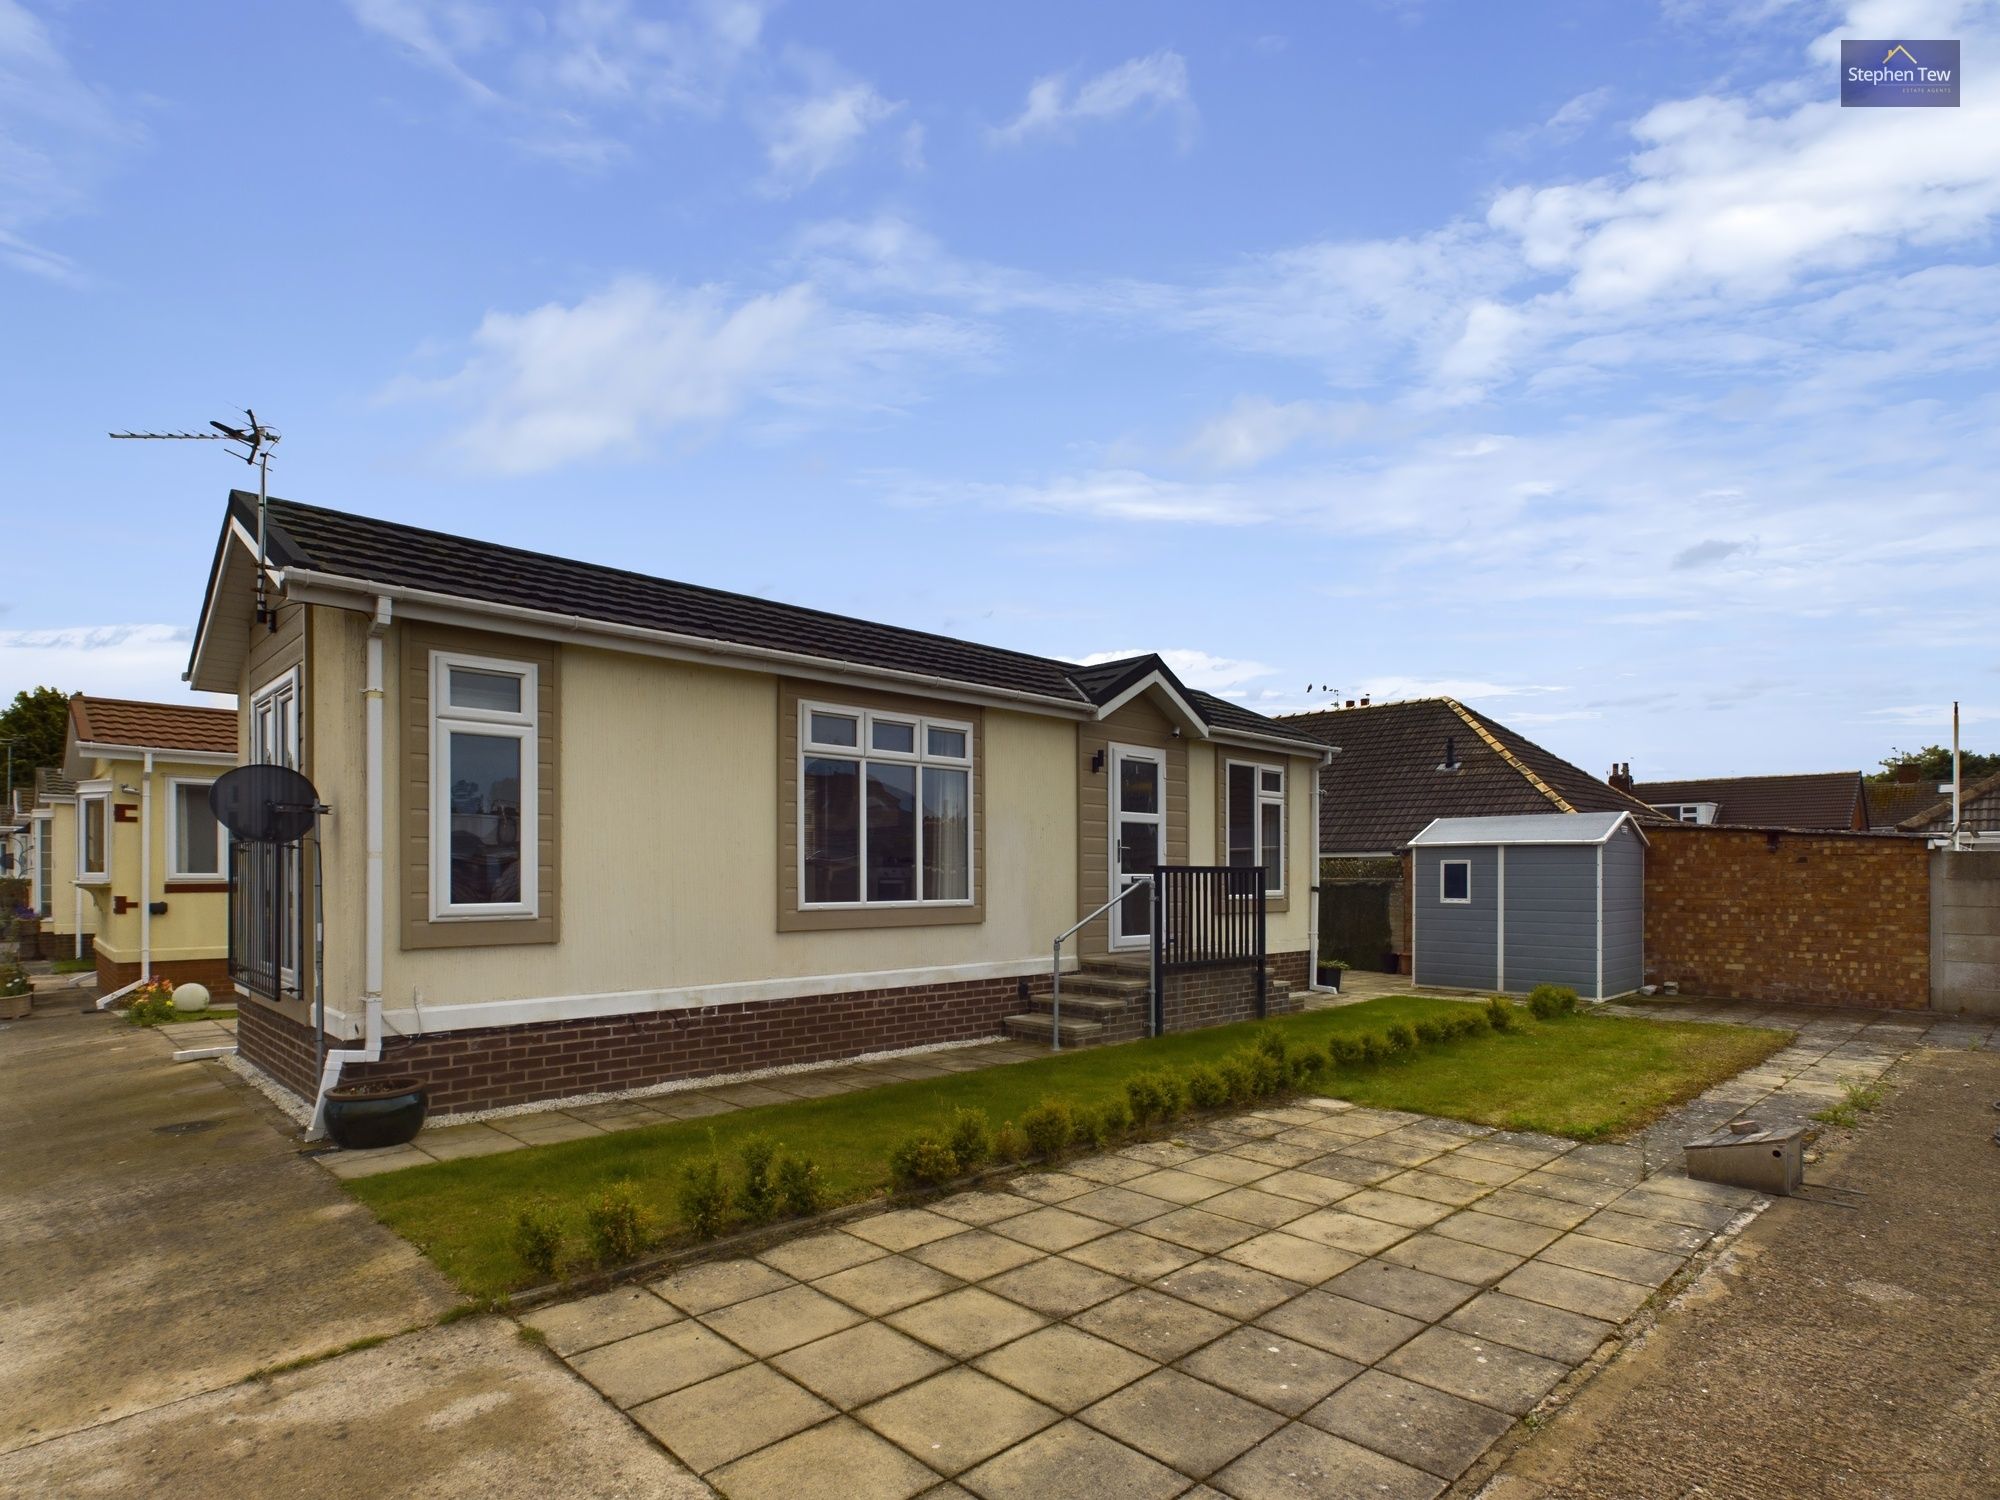 Pine Crescent, Newholme Residential Park, Blackpool, FY3 9TX